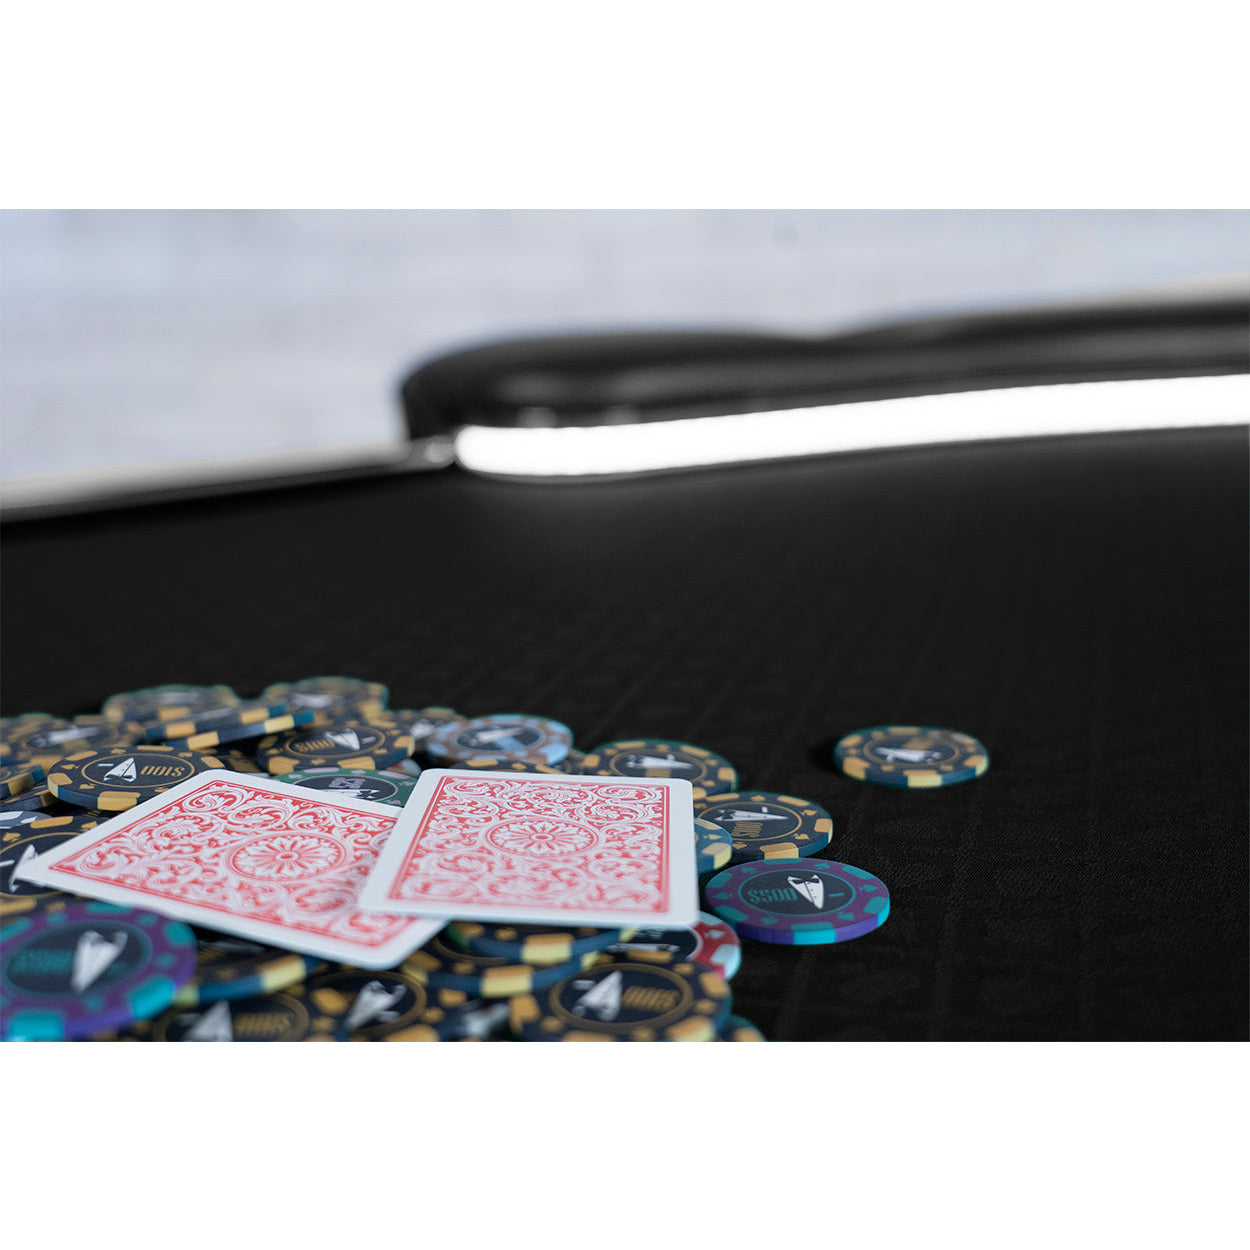 BBO The Aces Pro Alpha Folding Poker Table black speedcloth close up of cards and chips